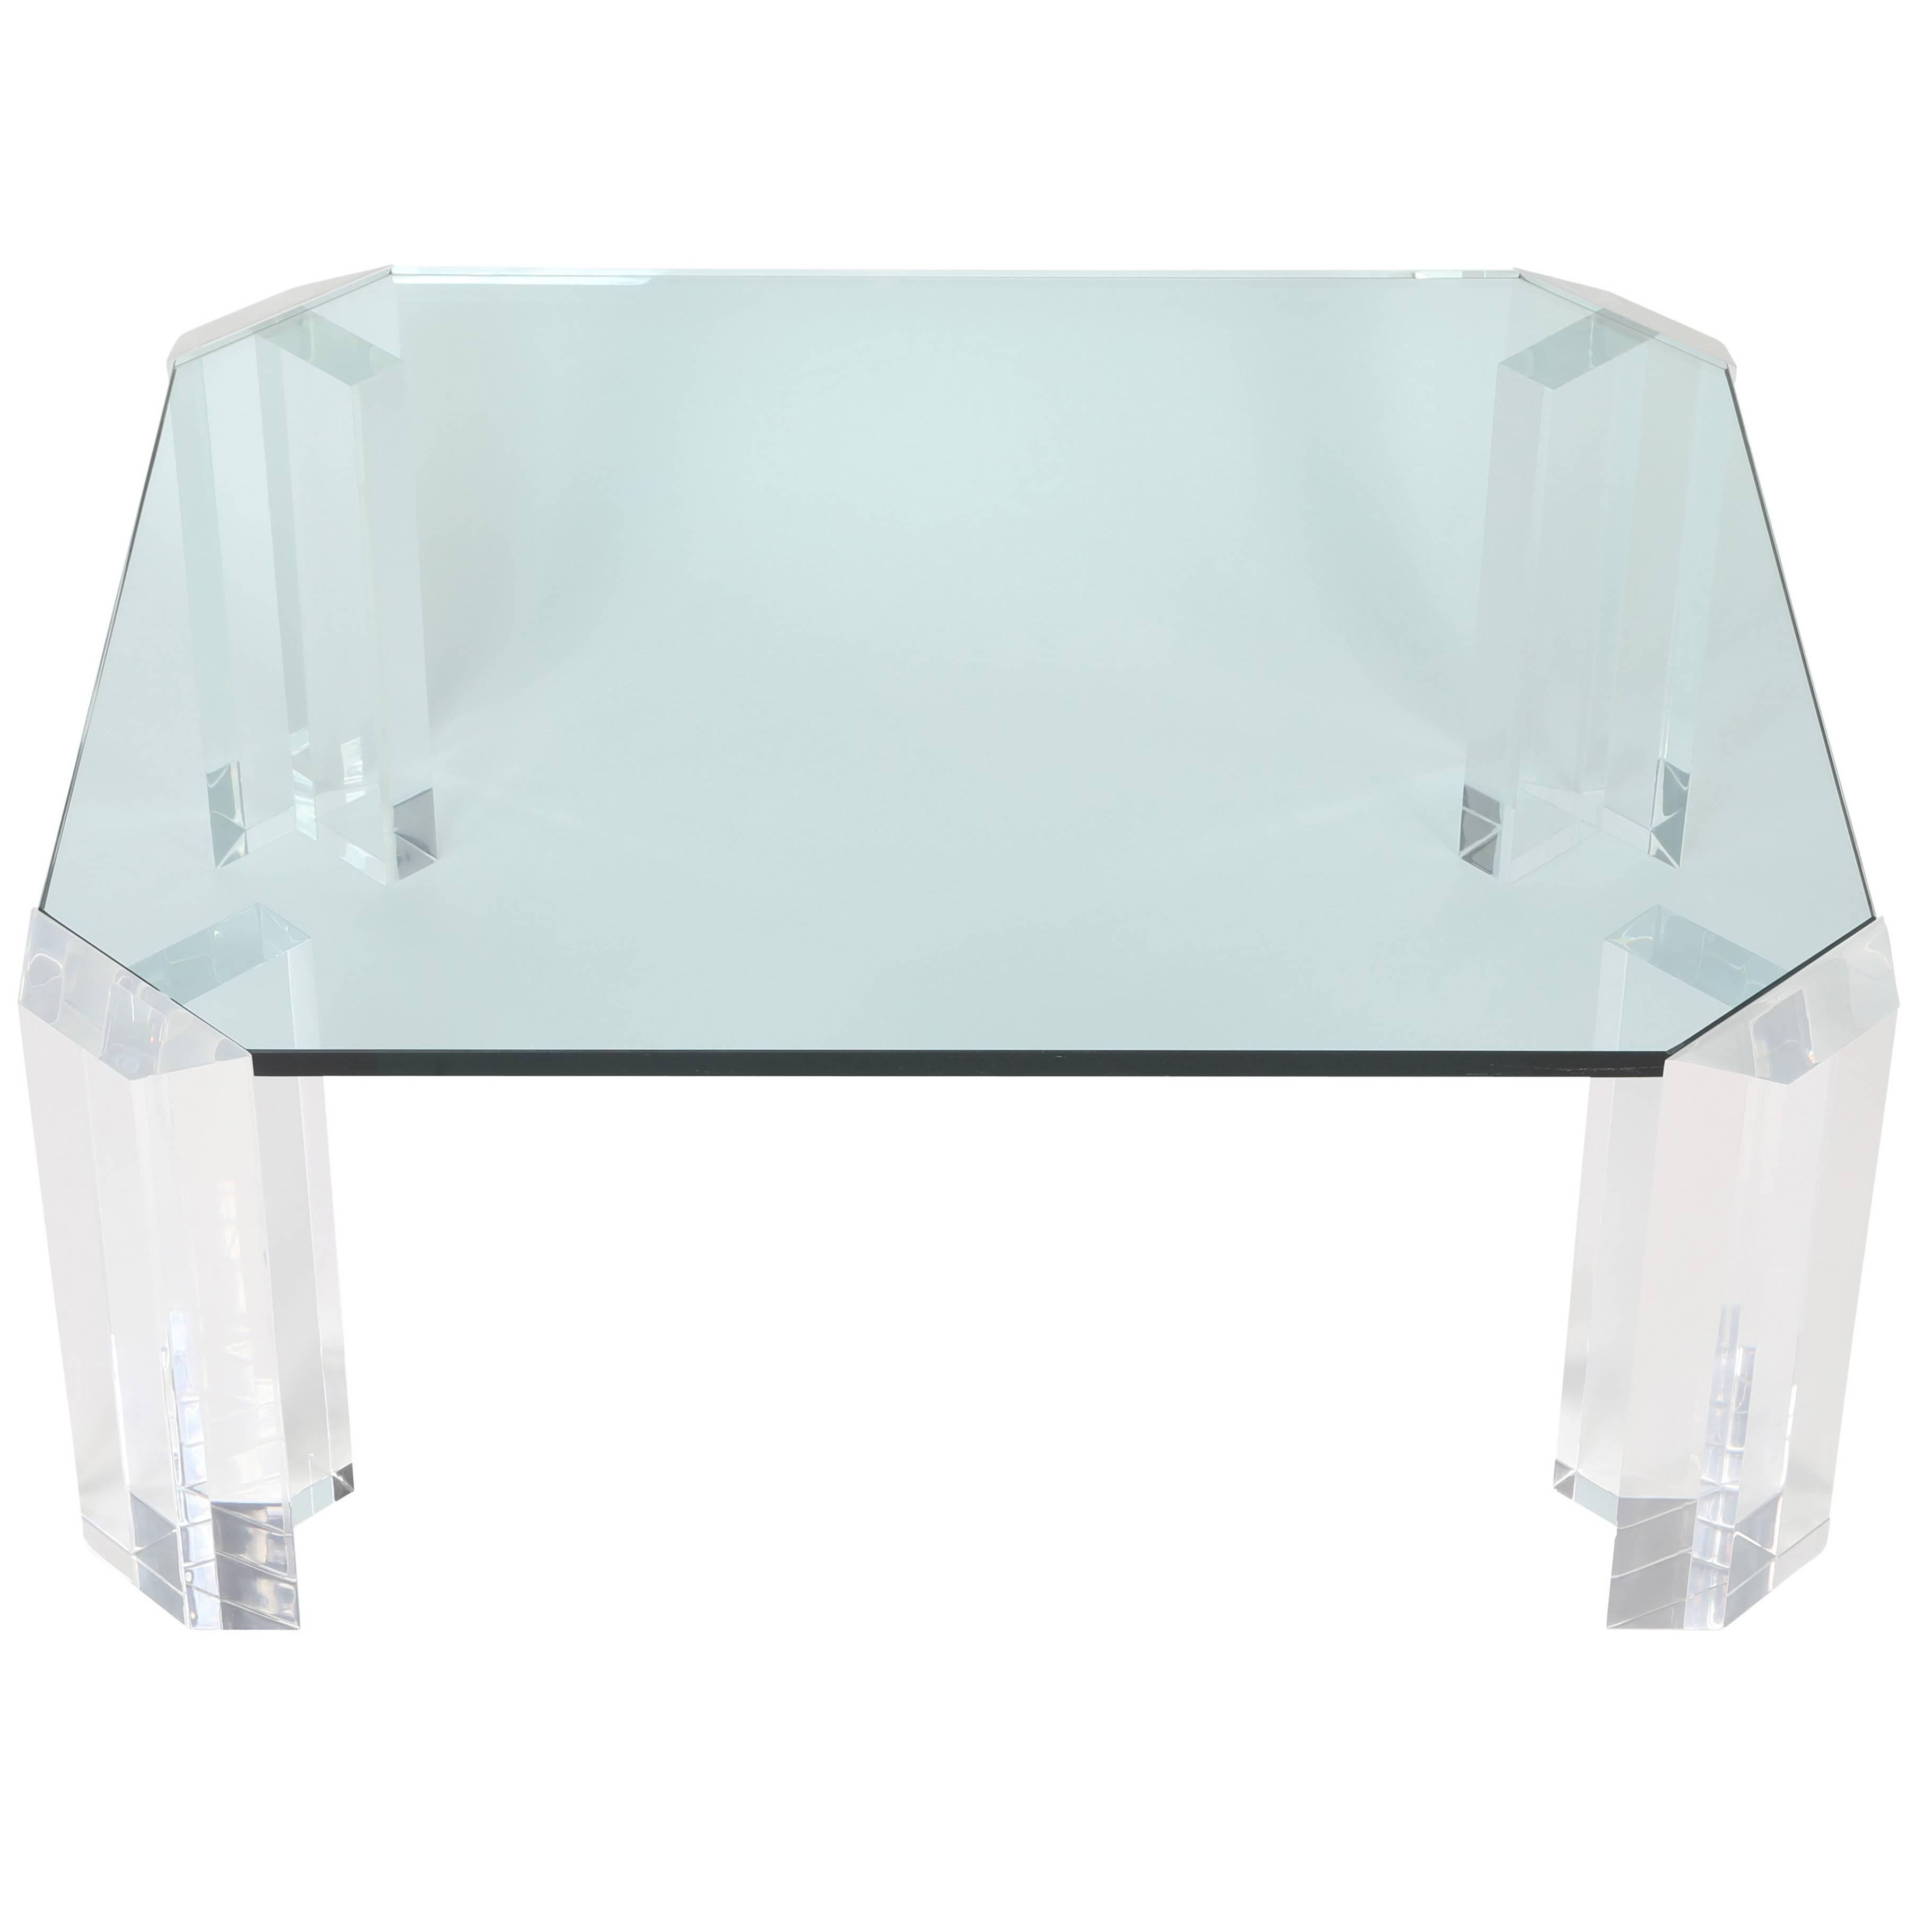 Rectangular 1970s Glass Cocktail Table with Clipped Corners and Lucite Supports For Sale